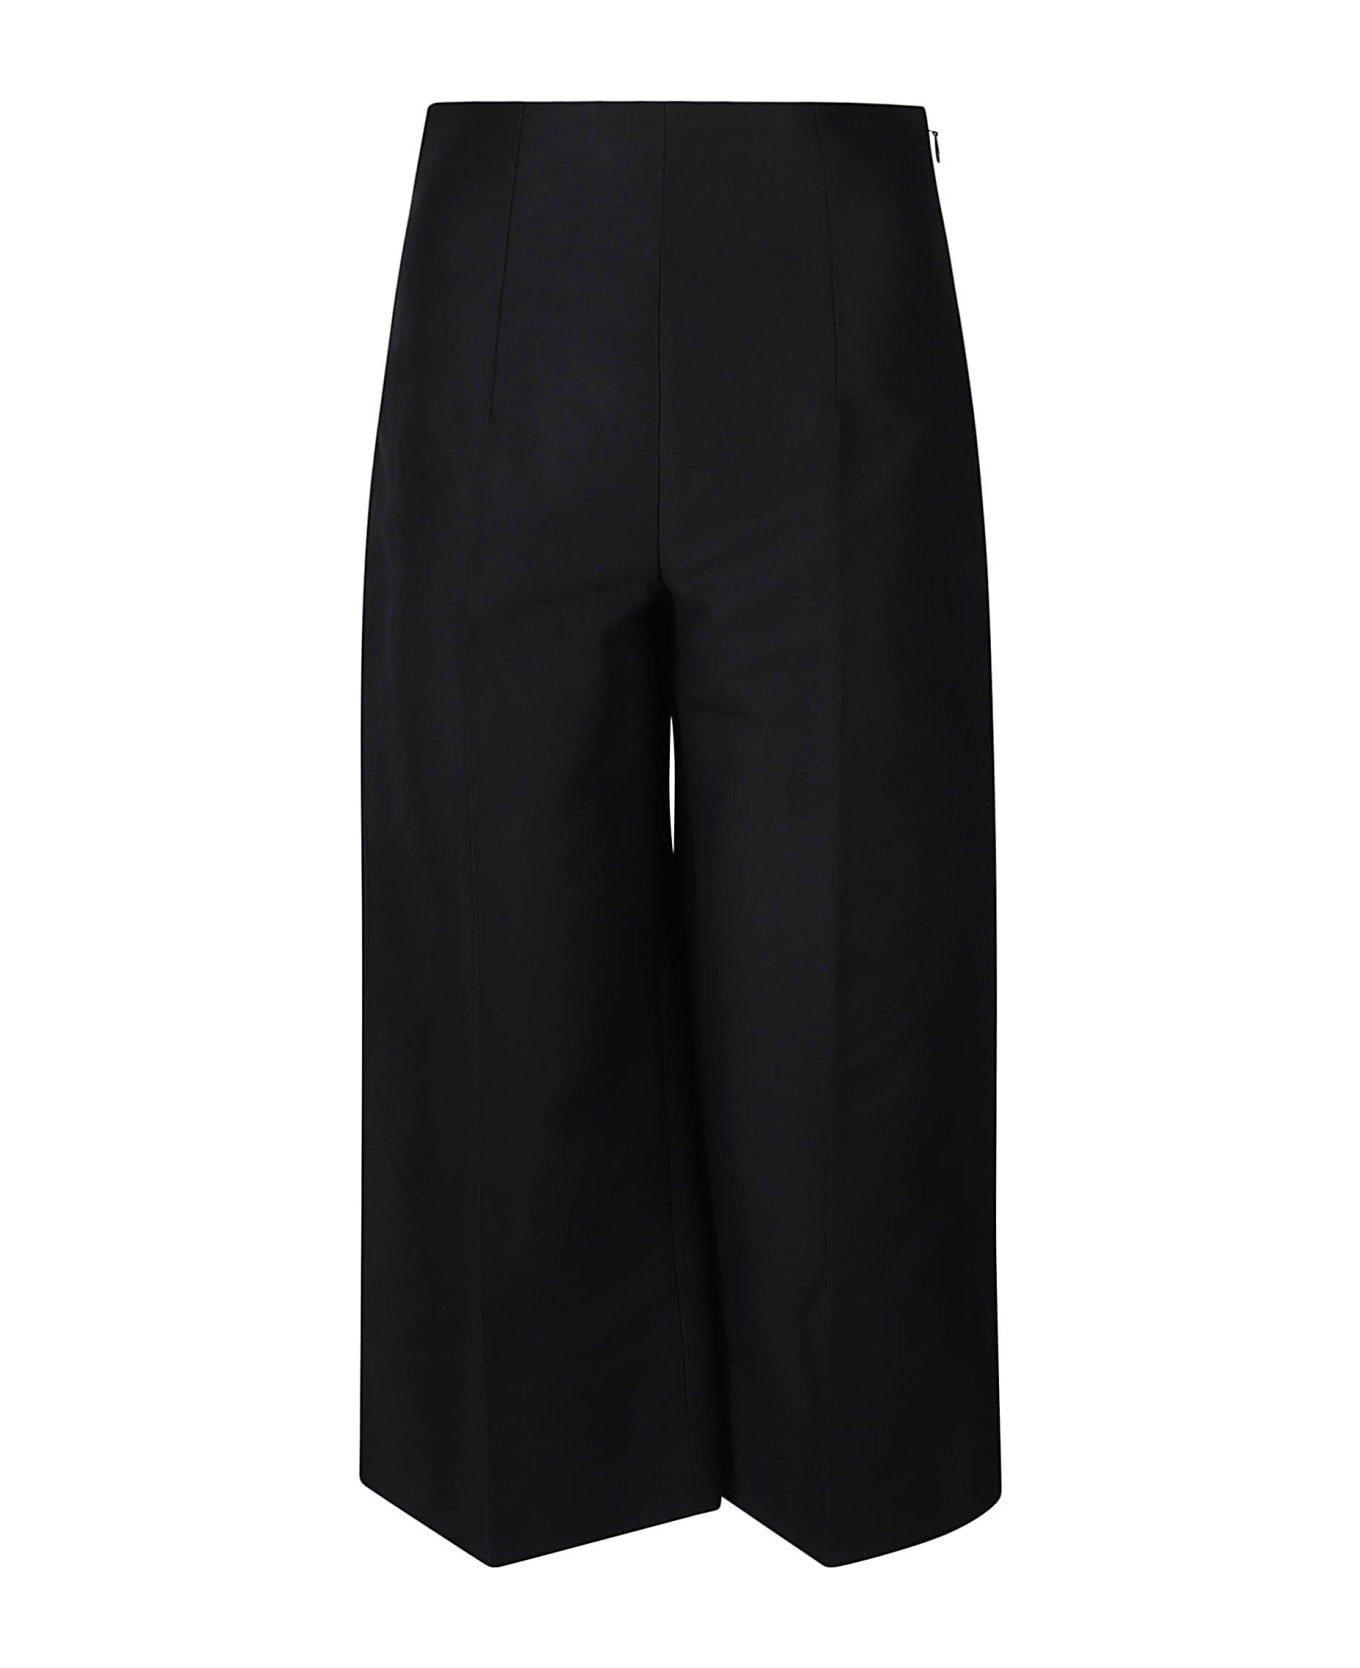 Marni Pressed Crease Cropped Trousers - Black ボトムス